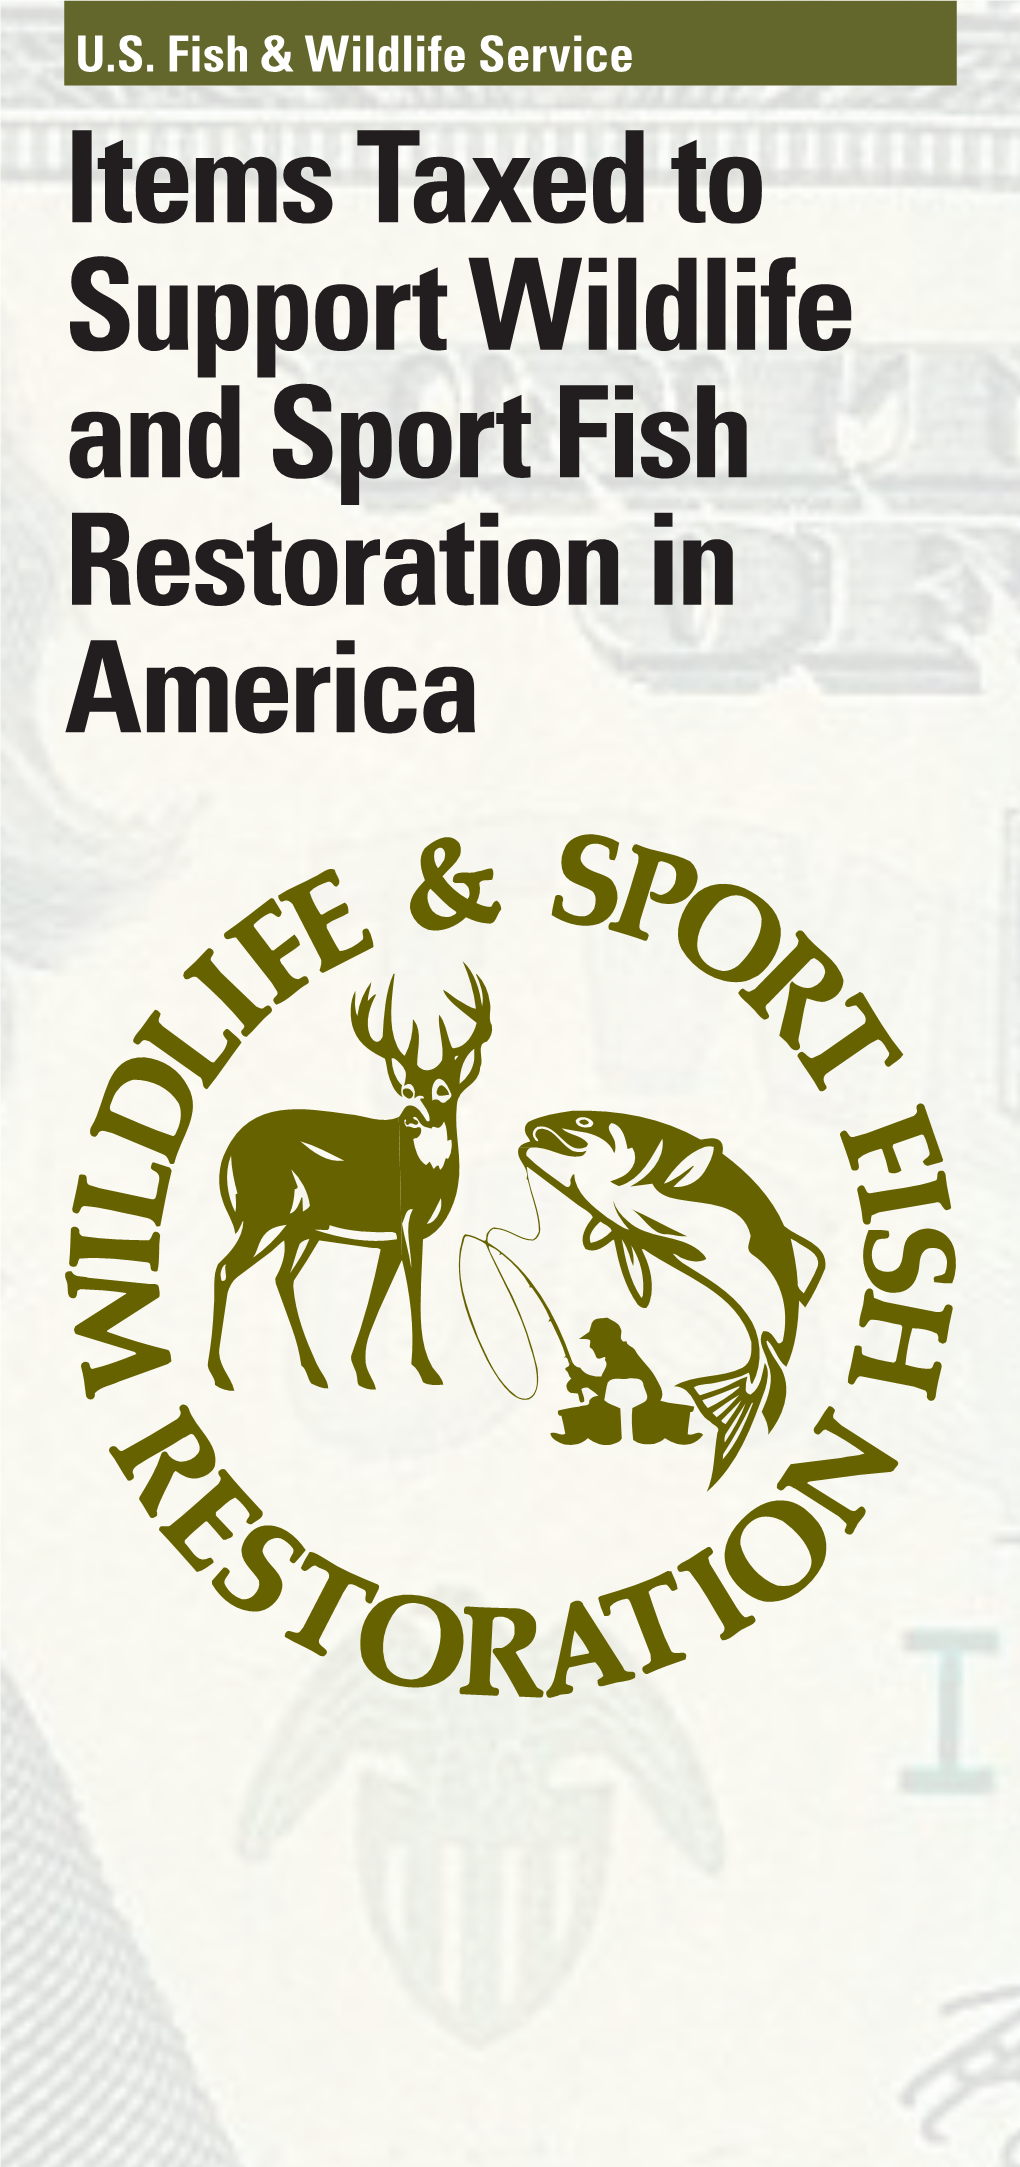 Items Taxed to Support Wildlife and Sport Fish Restoration in America